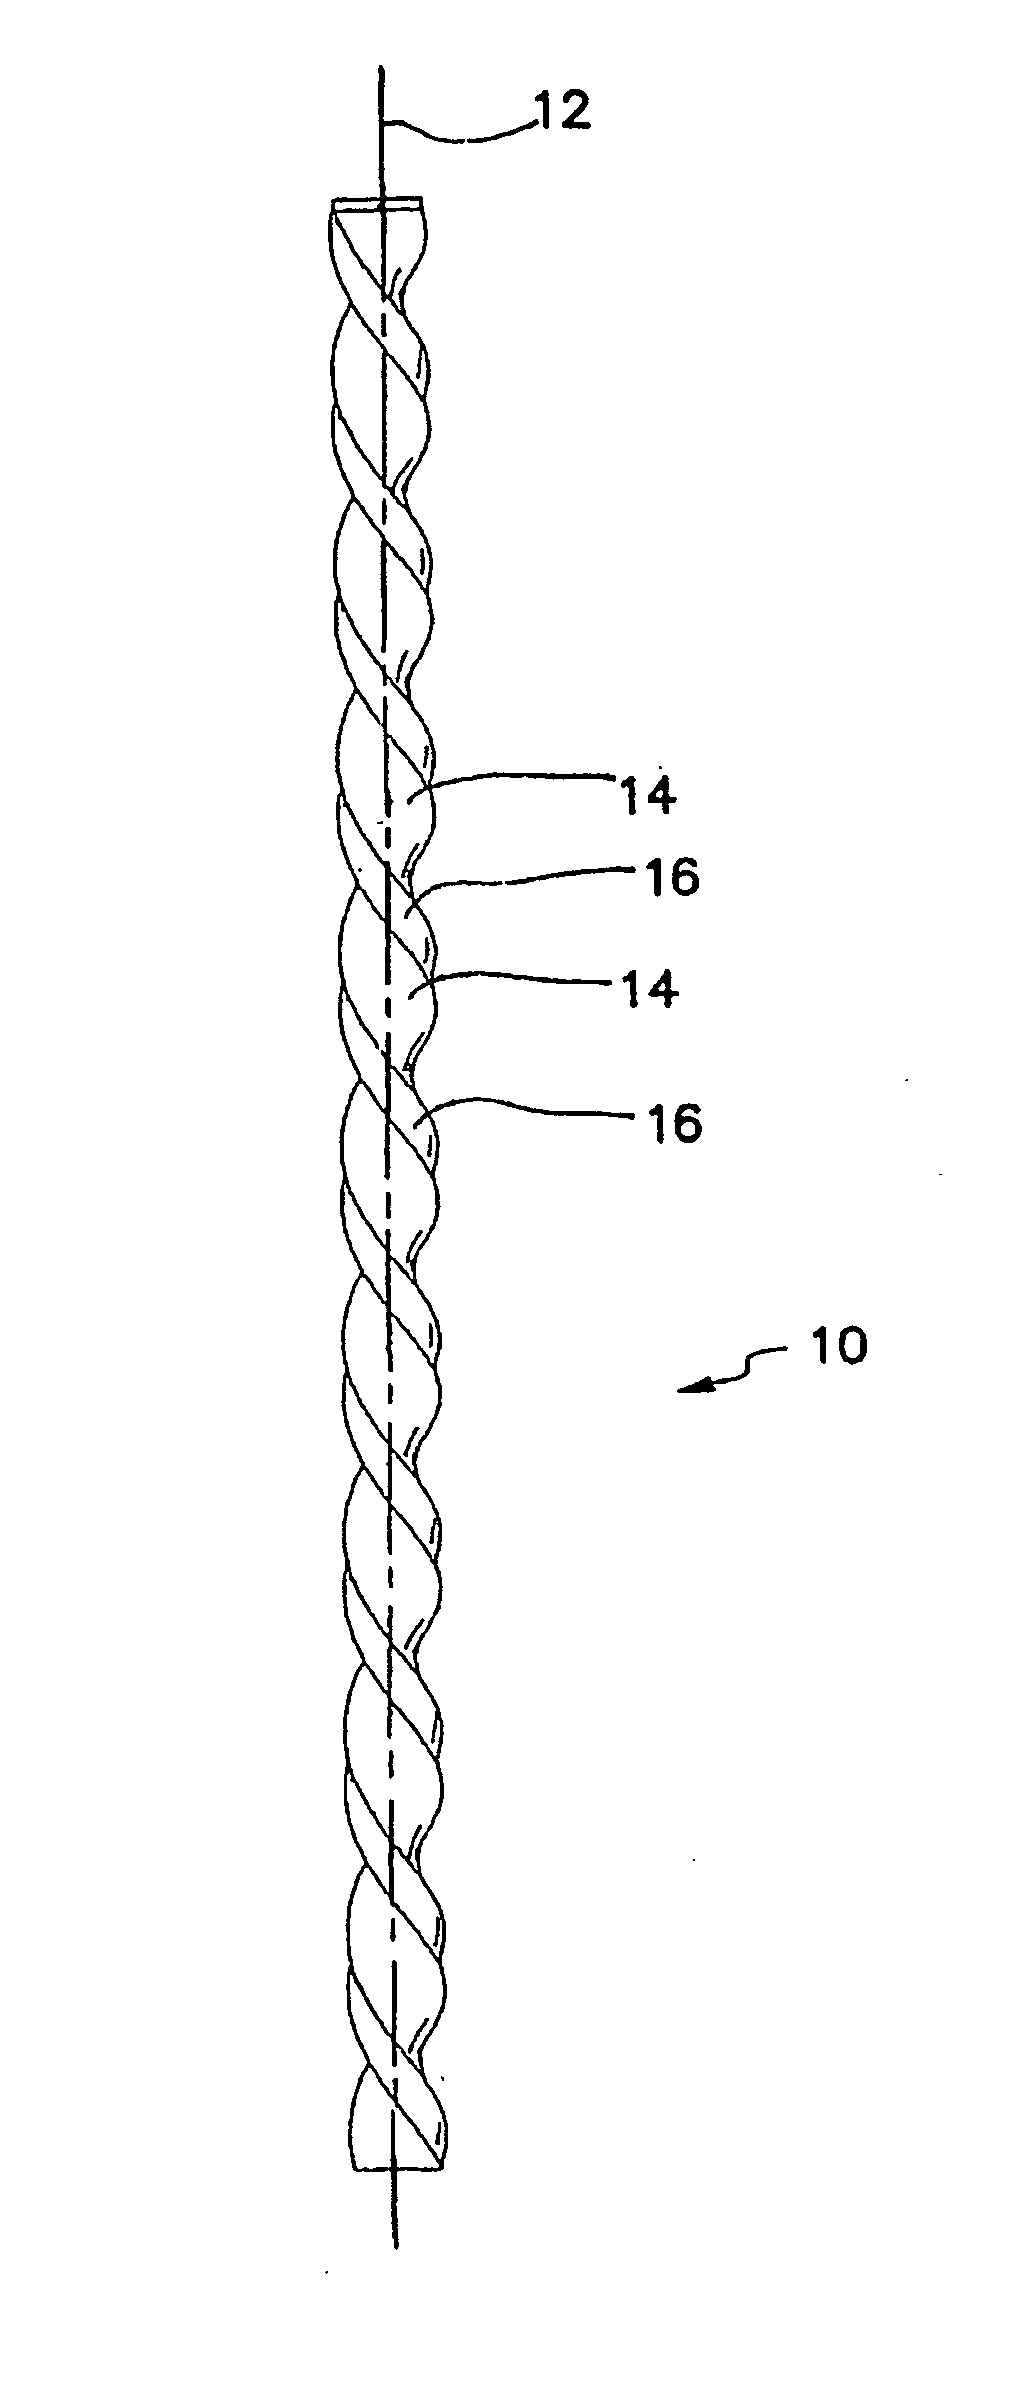 Helical guidewire